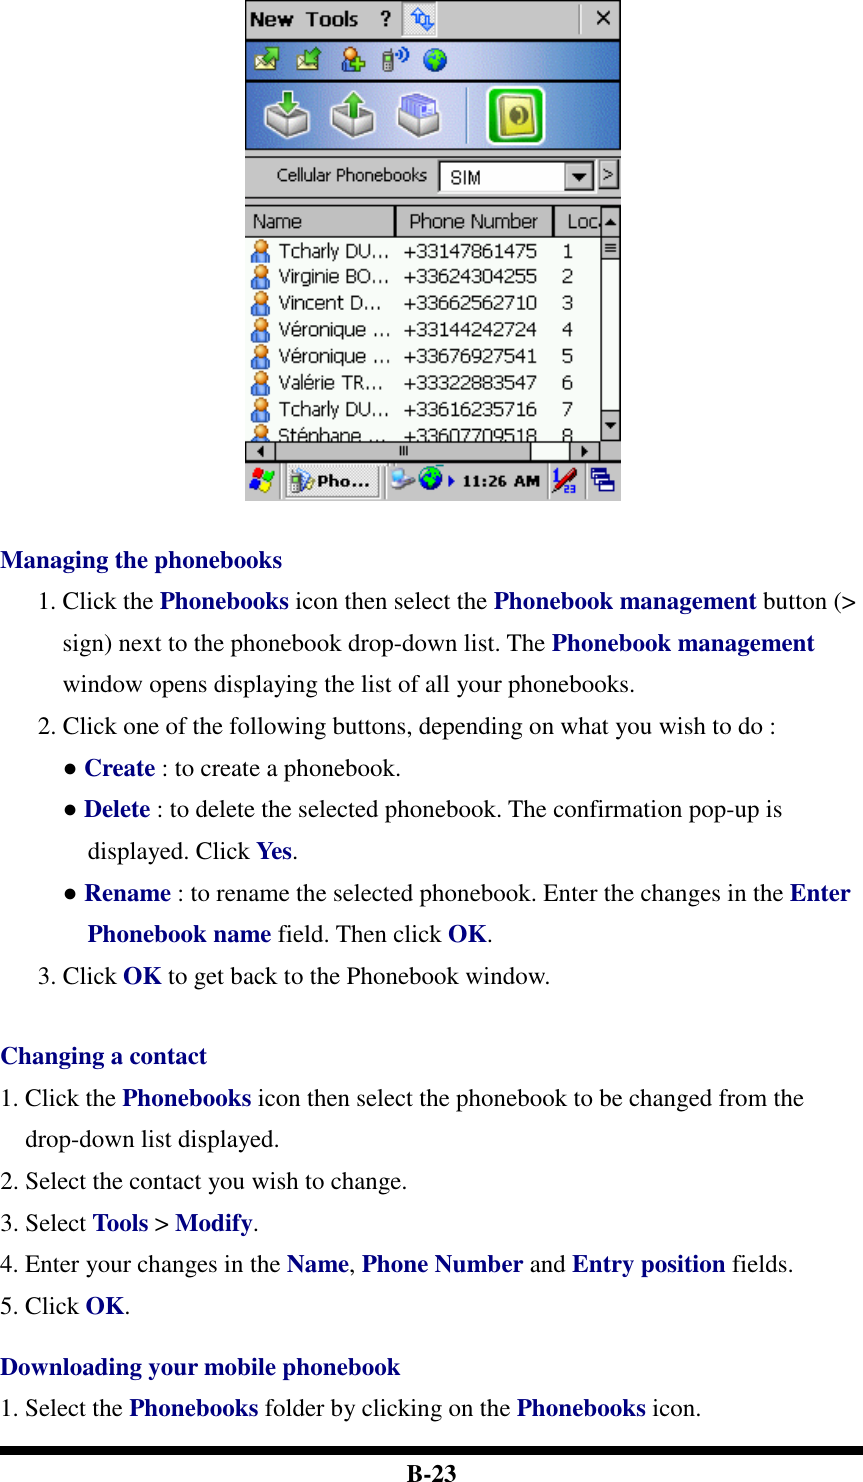  B-23   Managing the phonebooks 1. Click the Phonebooks icon then select the Phonebook management button (&gt; sign) next to the phonebook drop-down list. The Phonebook management window opens displaying the list of all your phonebooks.   2. Click one of the following buttons, depending on what you wish to do :   ● Create : to create a phonebook. ● Delete : to delete the selected phonebook. The confirmation pop-up is displayed. Click Yes.   ● Rename : to rename the selected phonebook. Enter the changes in the Enter Phonebook name field. Then click OK.   3. Click OK to get back to the Phonebook window.   Changing a contact 1. Click the Phonebooks icon then select the phonebook to be changed from the drop-down list displayed. 2. Select the contact you wish to change. 3. Select Tools &gt; Modify. 4. Enter your changes in the Name, Phone Number and Entry position fields. 5. Click OK.  Downloading your mobile phonebook 1. Select the Phonebooks folder by clicking on the Phonebooks icon. 